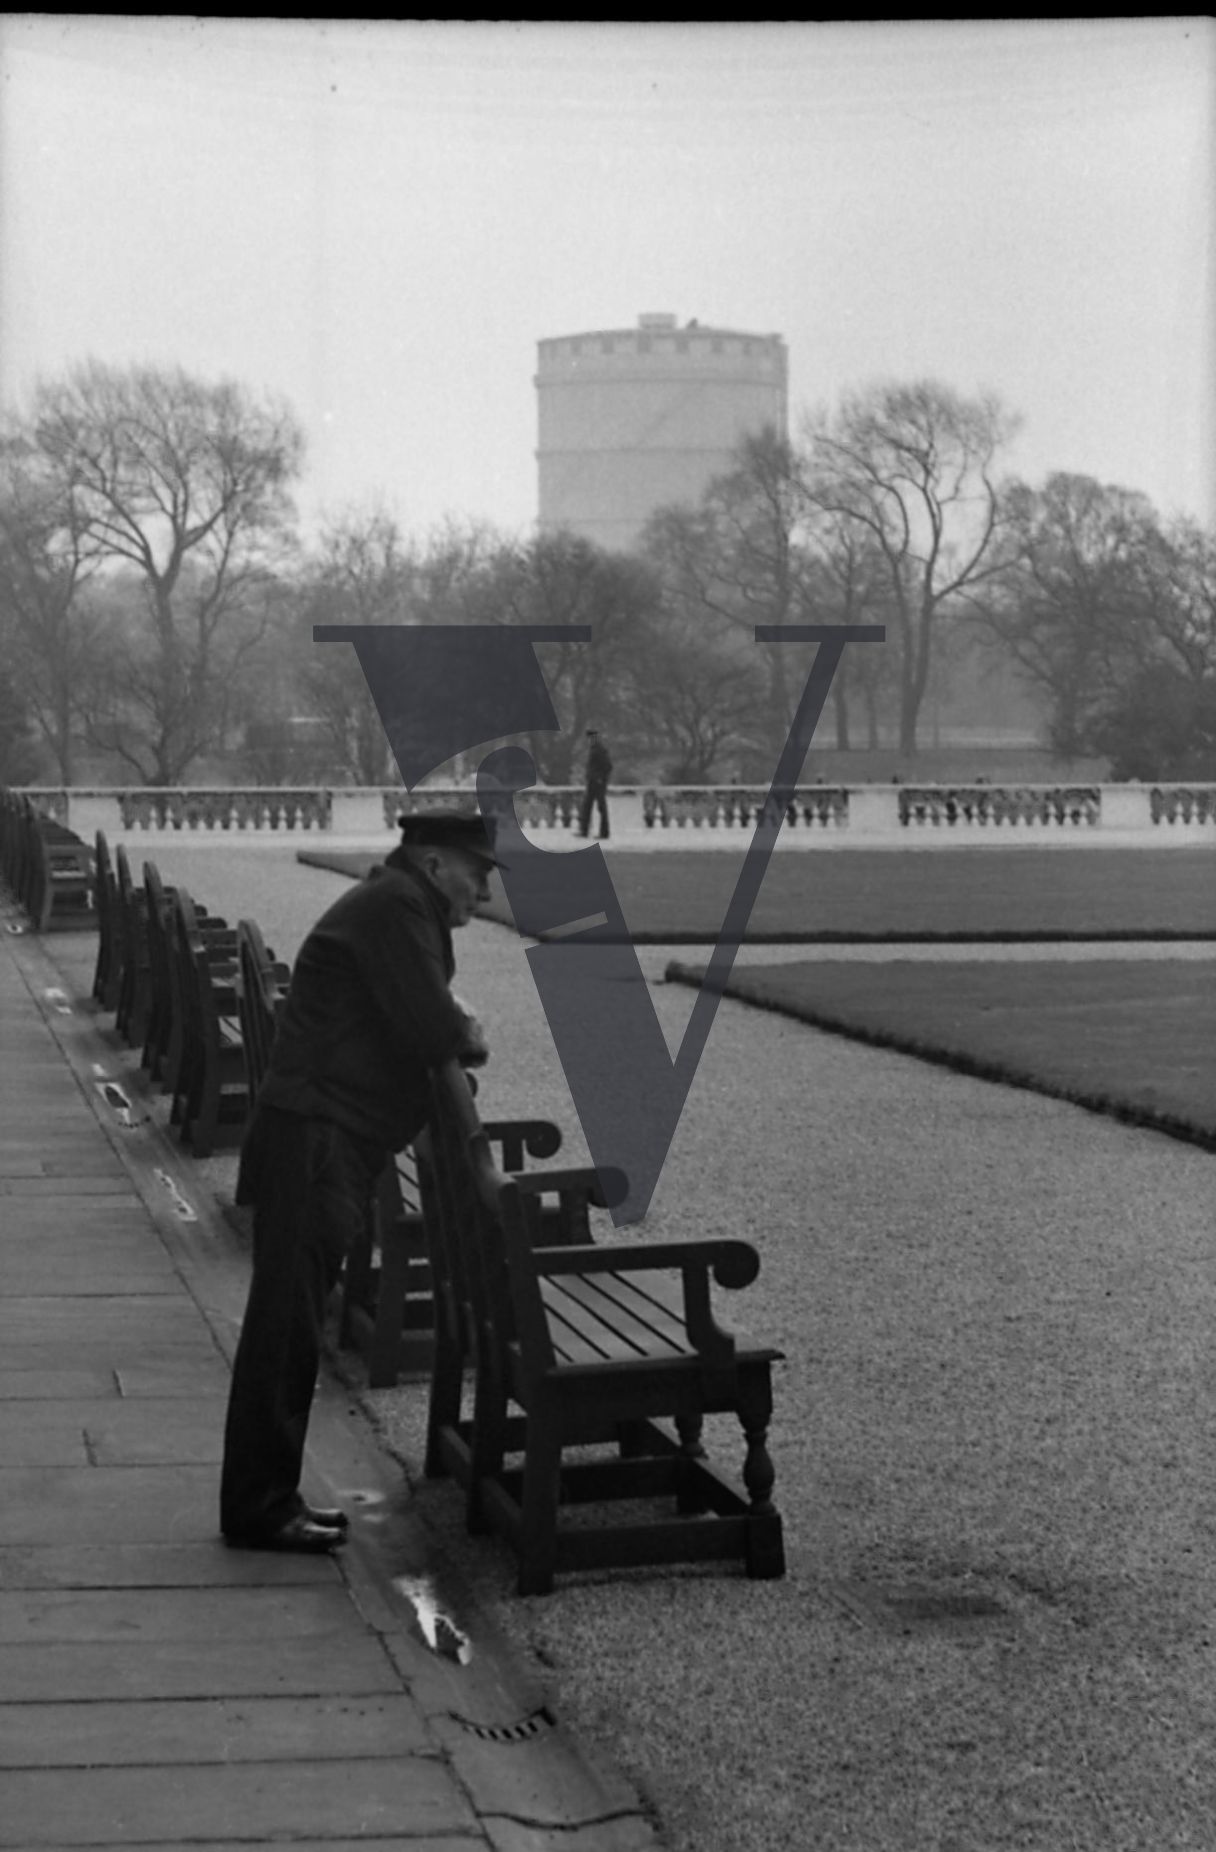 Royal Hospital, Chelsea Pensioners, man leaning on bench.